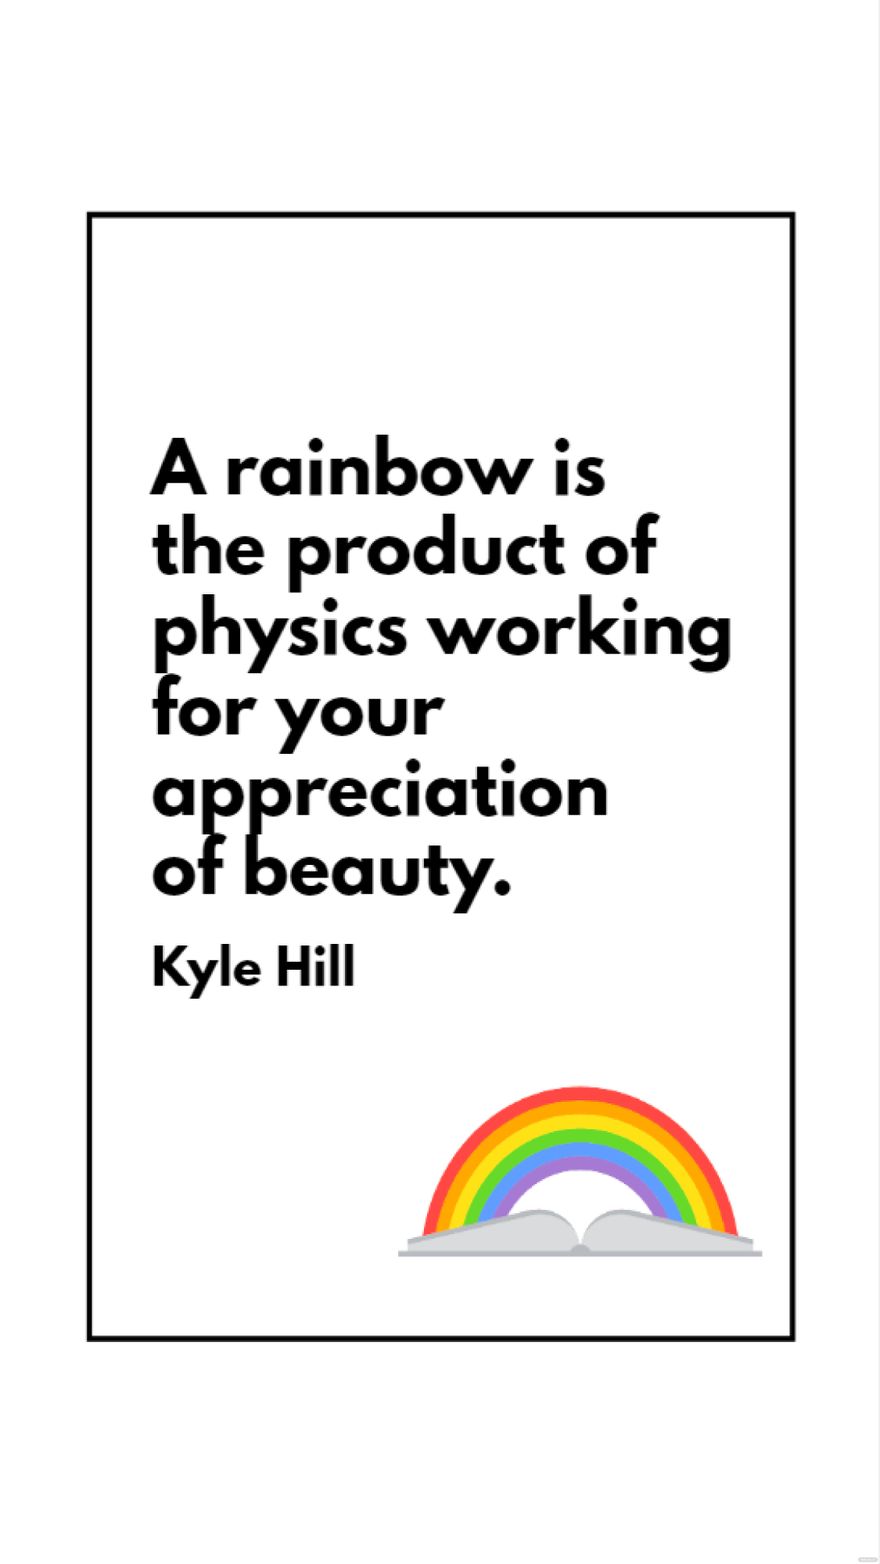 Free Kyle Hill - A rainbow is the product of physics working for your appreciation of beauty. in JPG